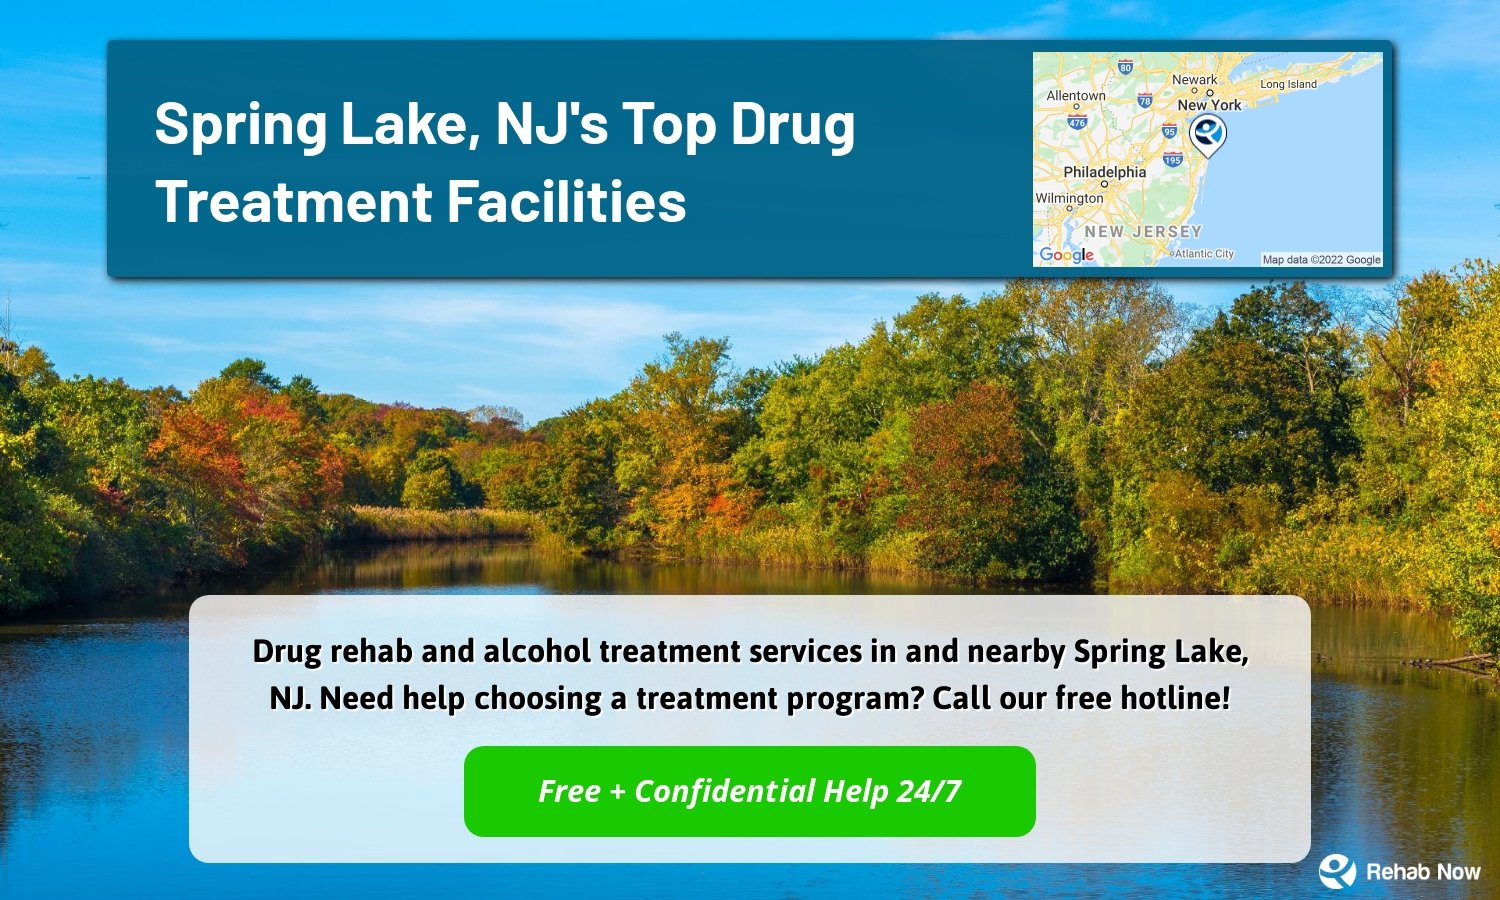 Drug rehab and alcohol treatment services in and nearby Spring Lake, NJ. Need help choosing a treatment program? Call our free hotline!